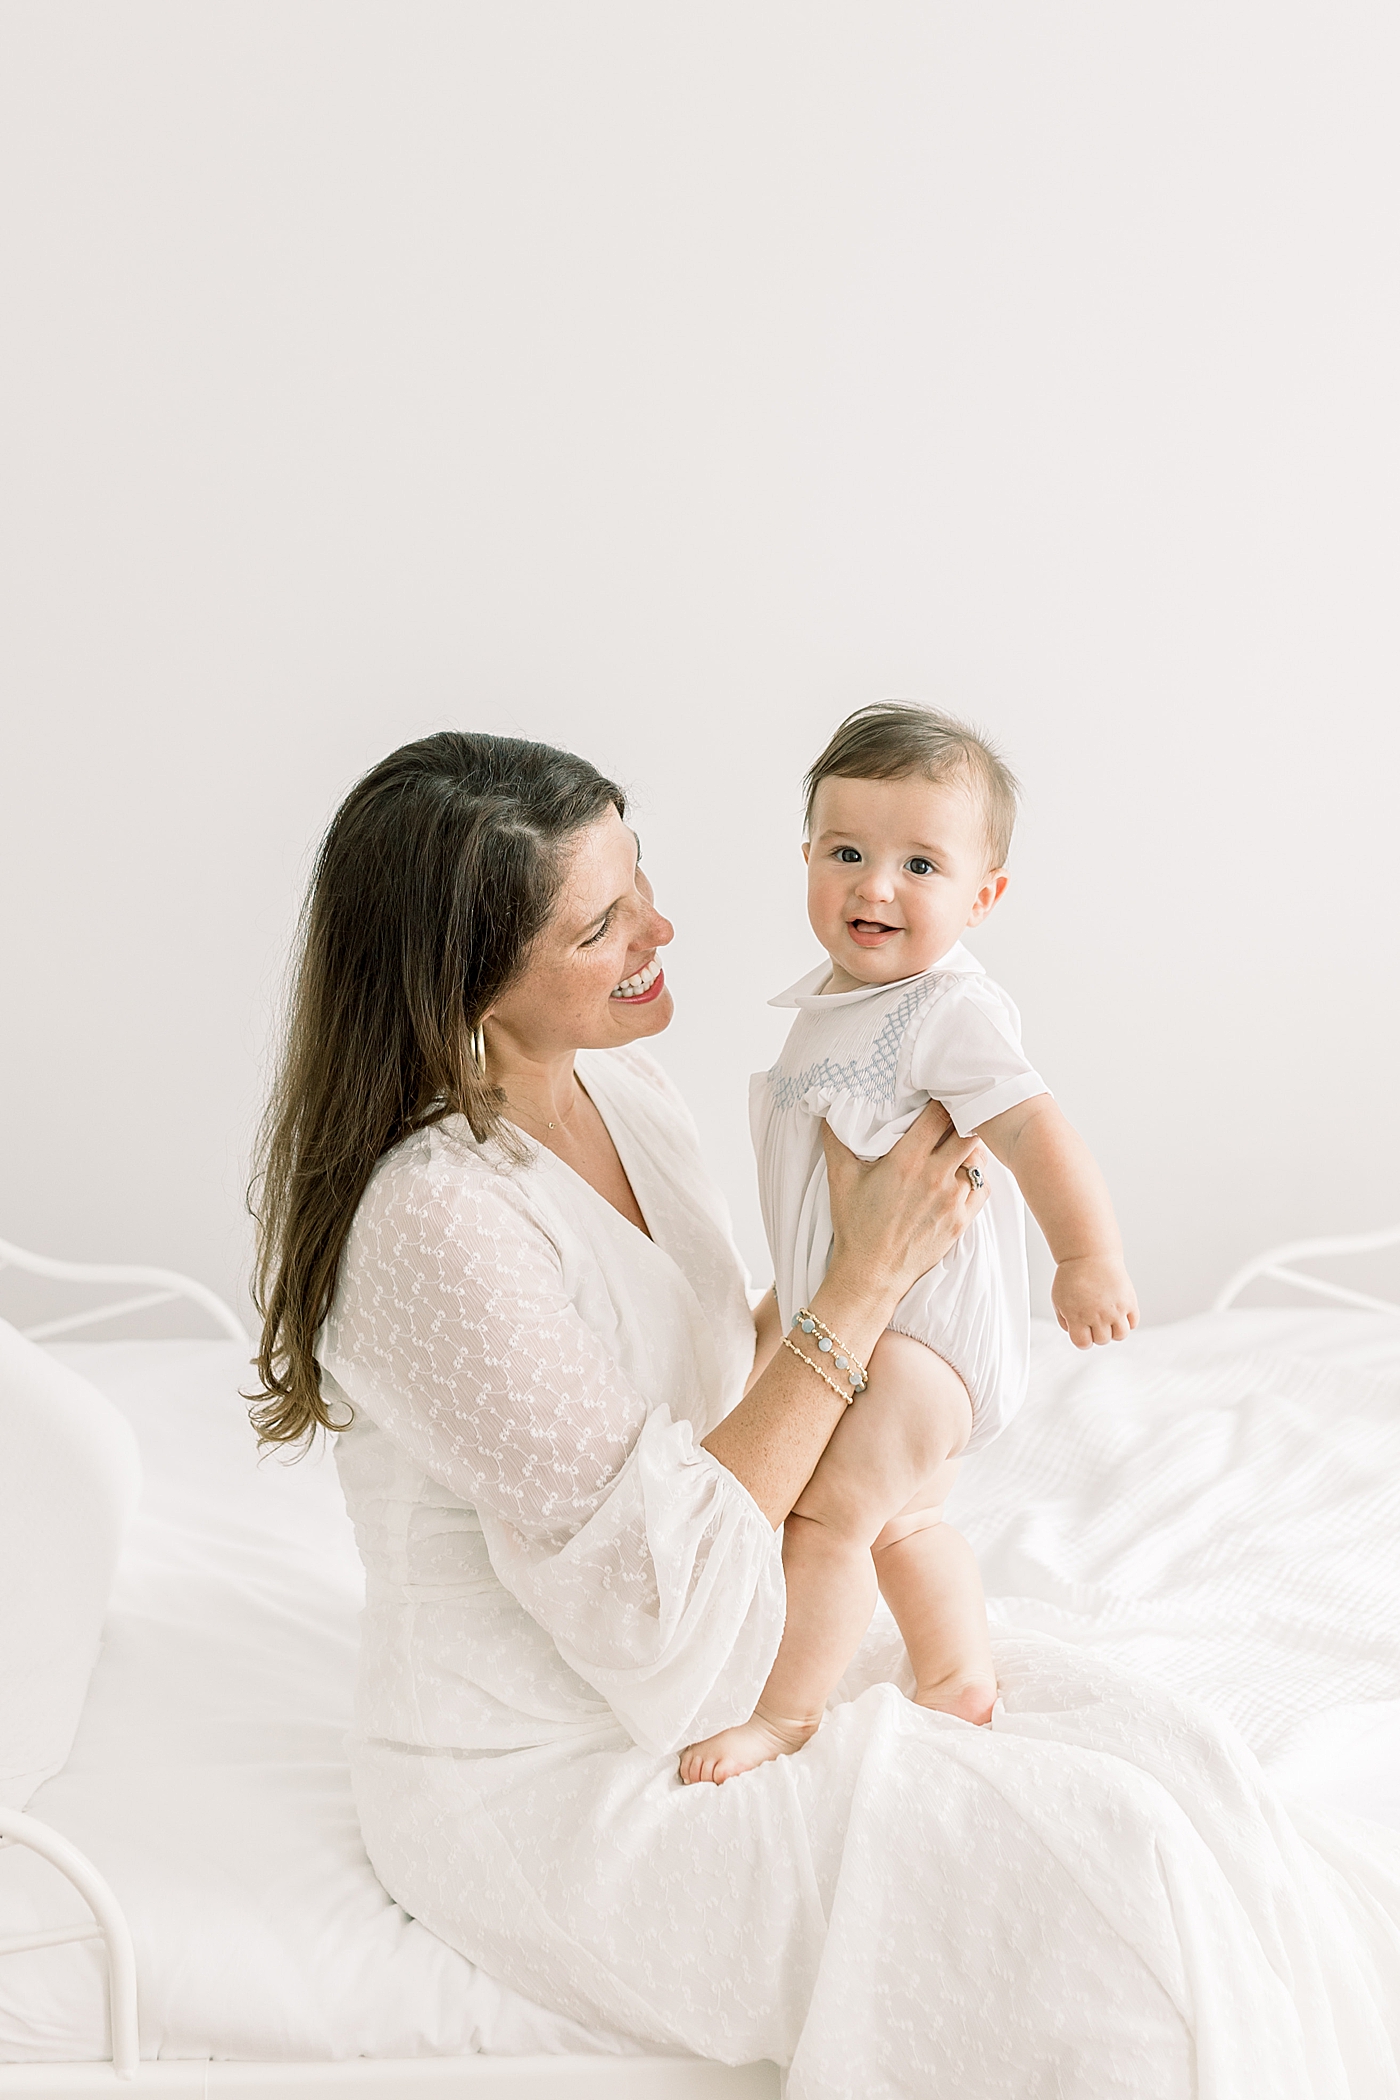 Baby boy with his mom in the studio | Image by Caitlyn Motycka